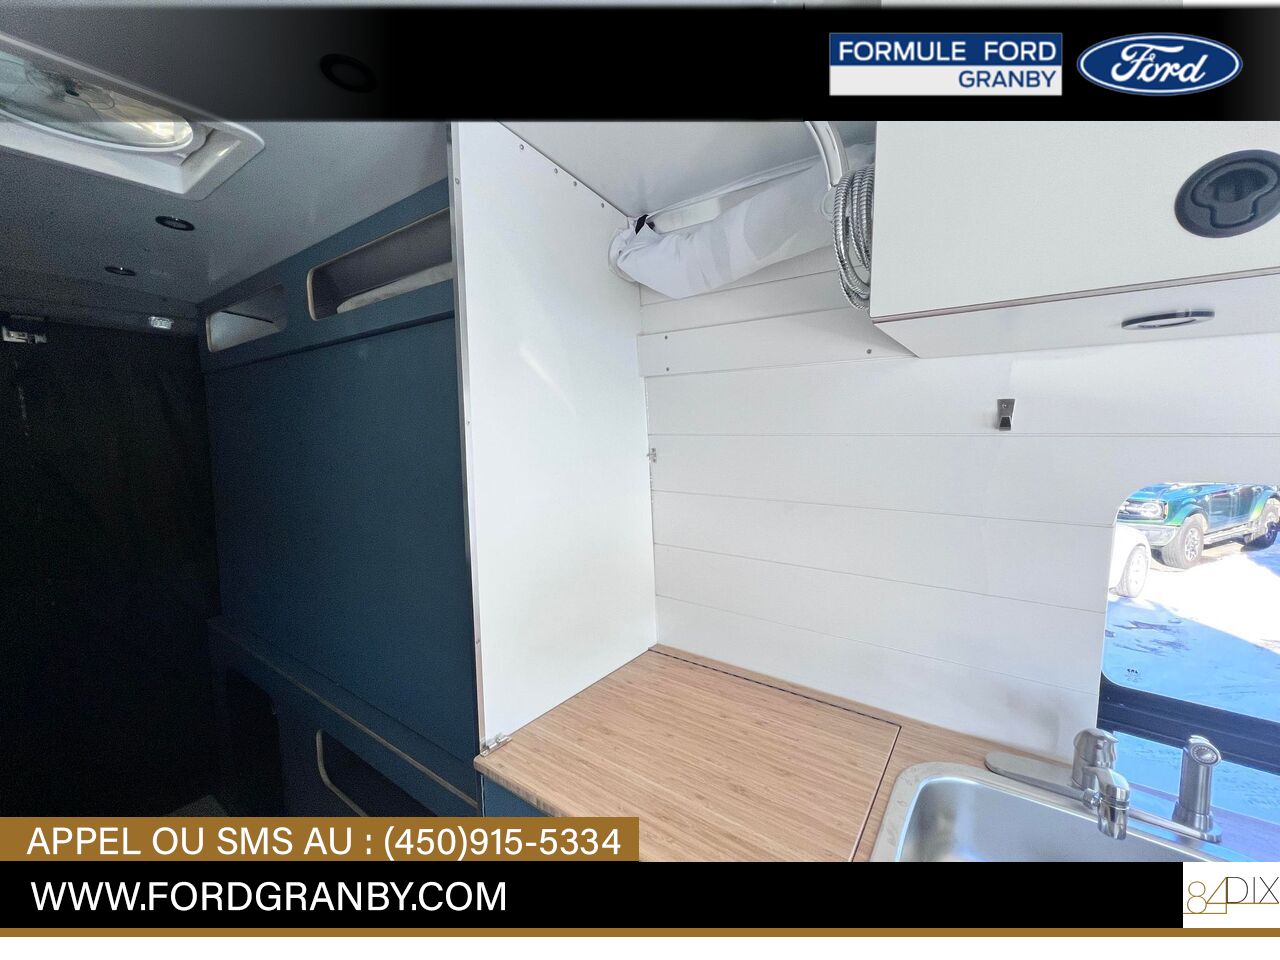 2019 Ford Transit fourgon utilitaire Granby - photo #33